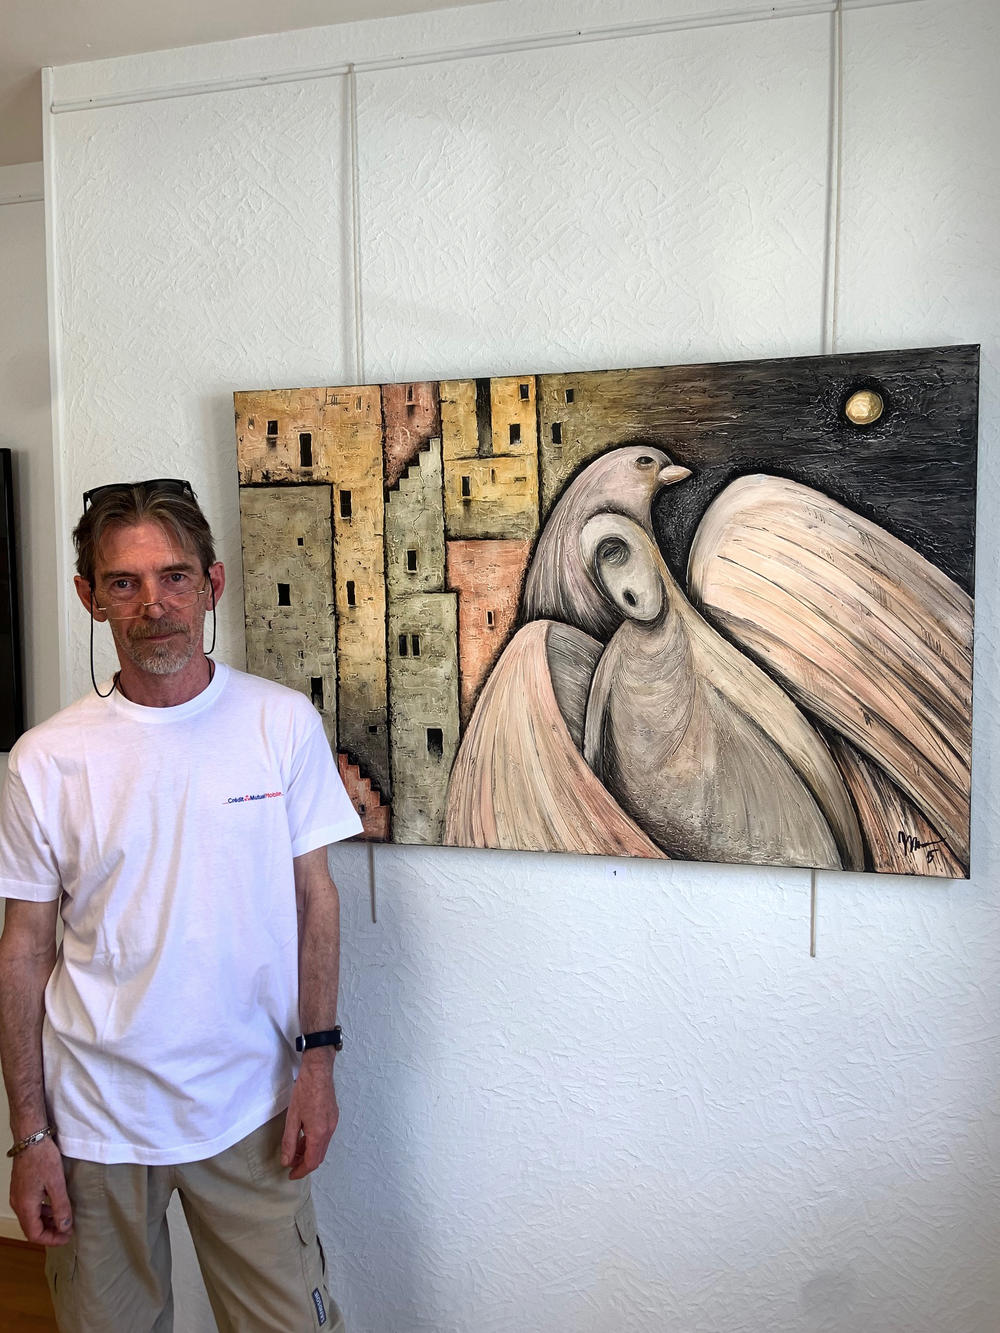 Yuri Mazurenko fled with his wife and their dog and cat from the Ukrainian city of Chernihiv to France. Now he is able to exhibit his art, including this painting called <em>Guard</em>, at the local tourism office in a village in Burgundy.